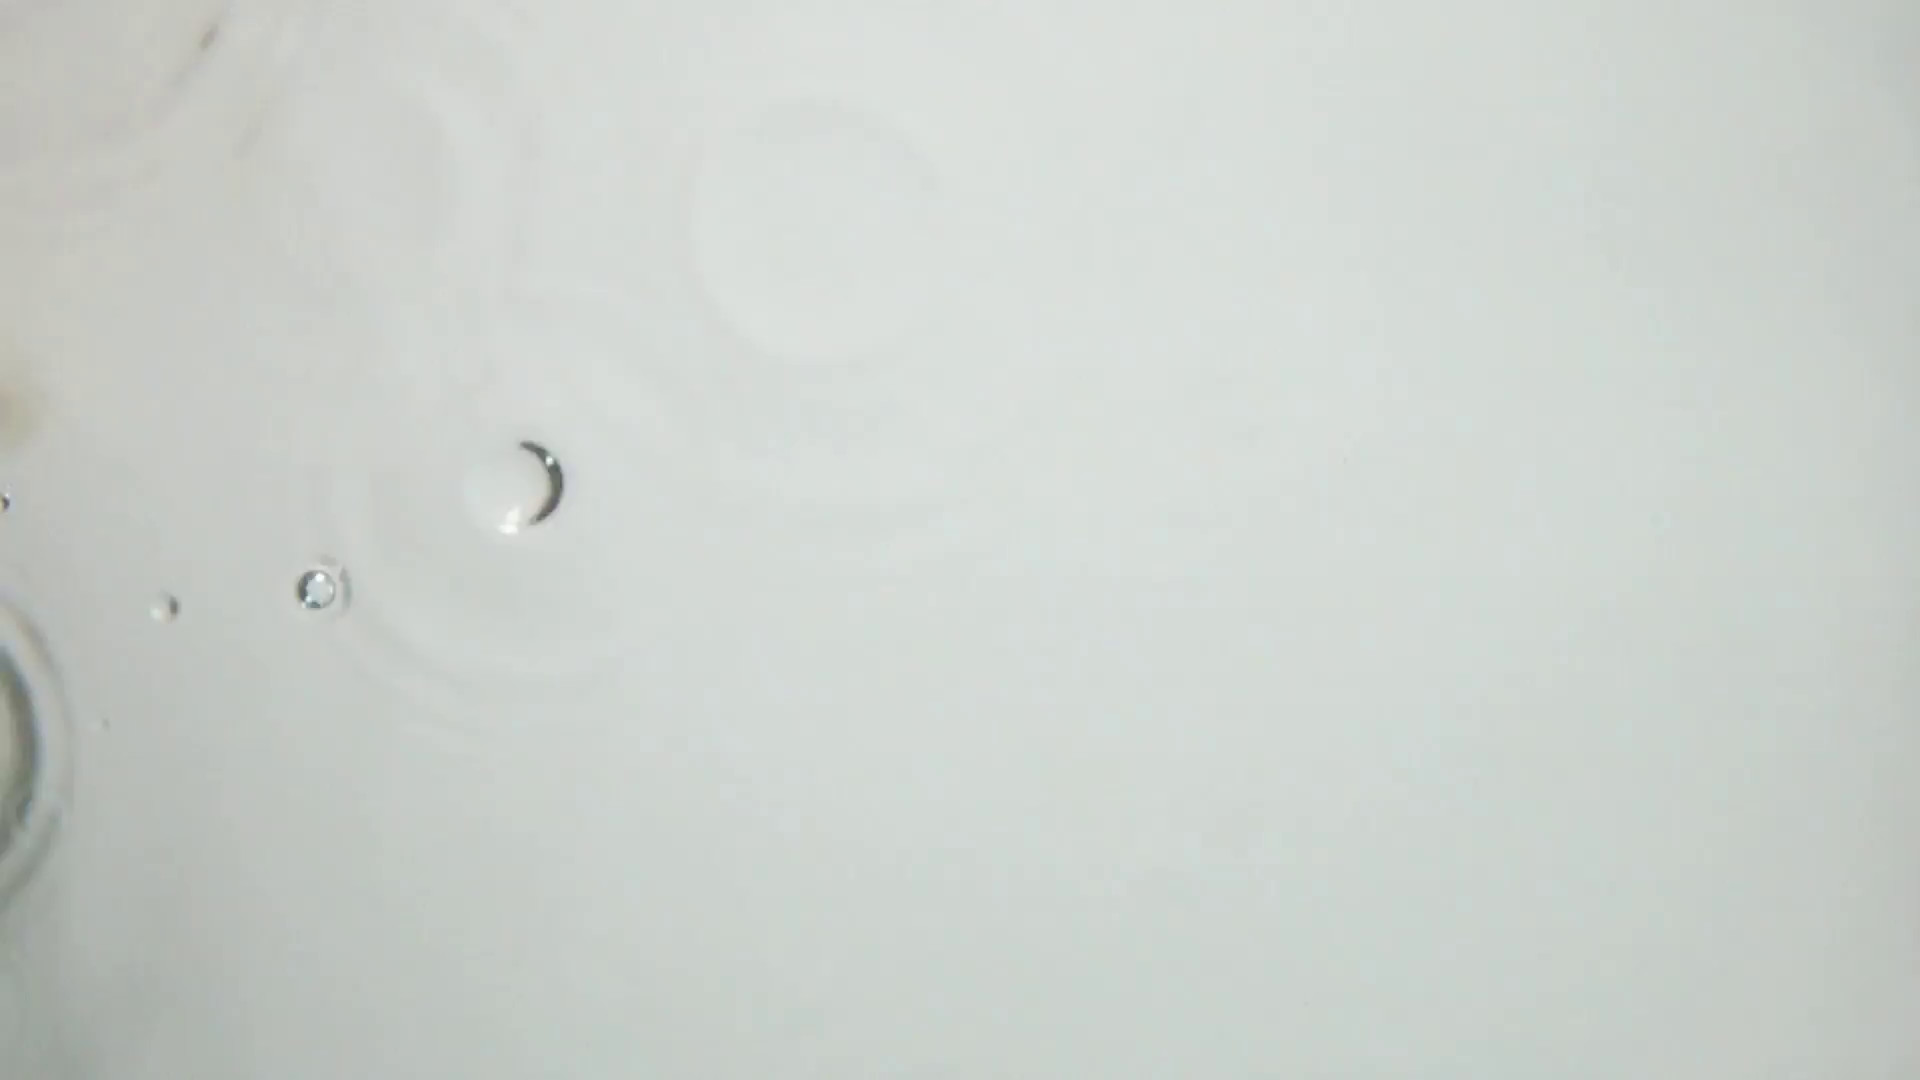 1920x1080 Little point droplet splashes at the transparent water surface with liquid  splashes. Super slow motion shot on white background isolated.